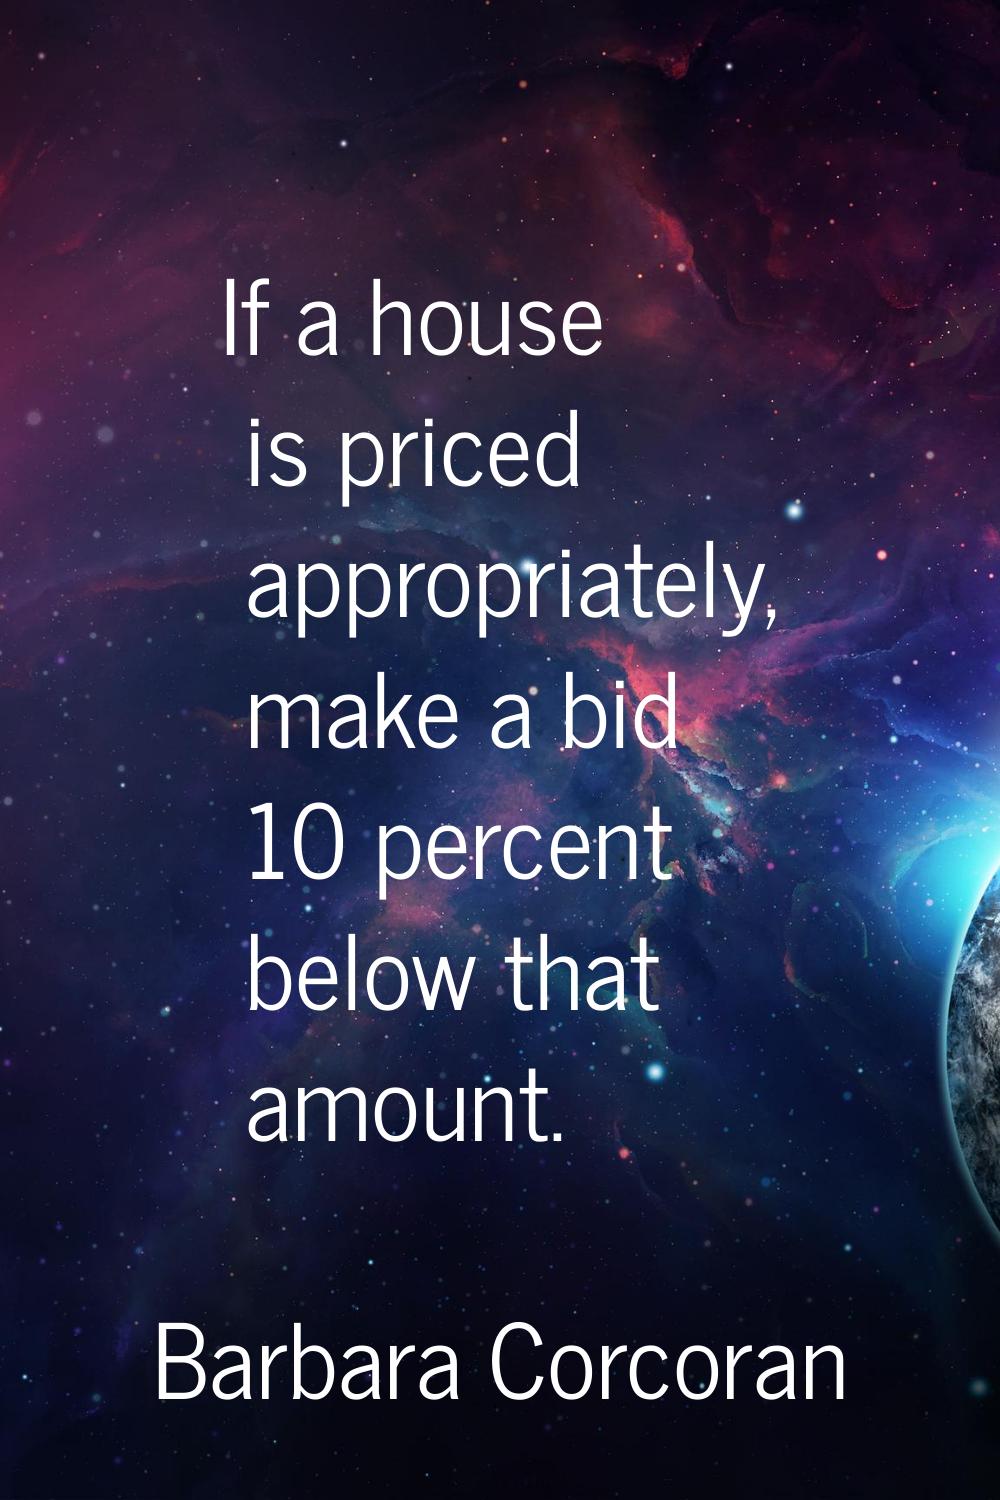 If a house is priced appropriately, make a bid 10 percent below that amount.